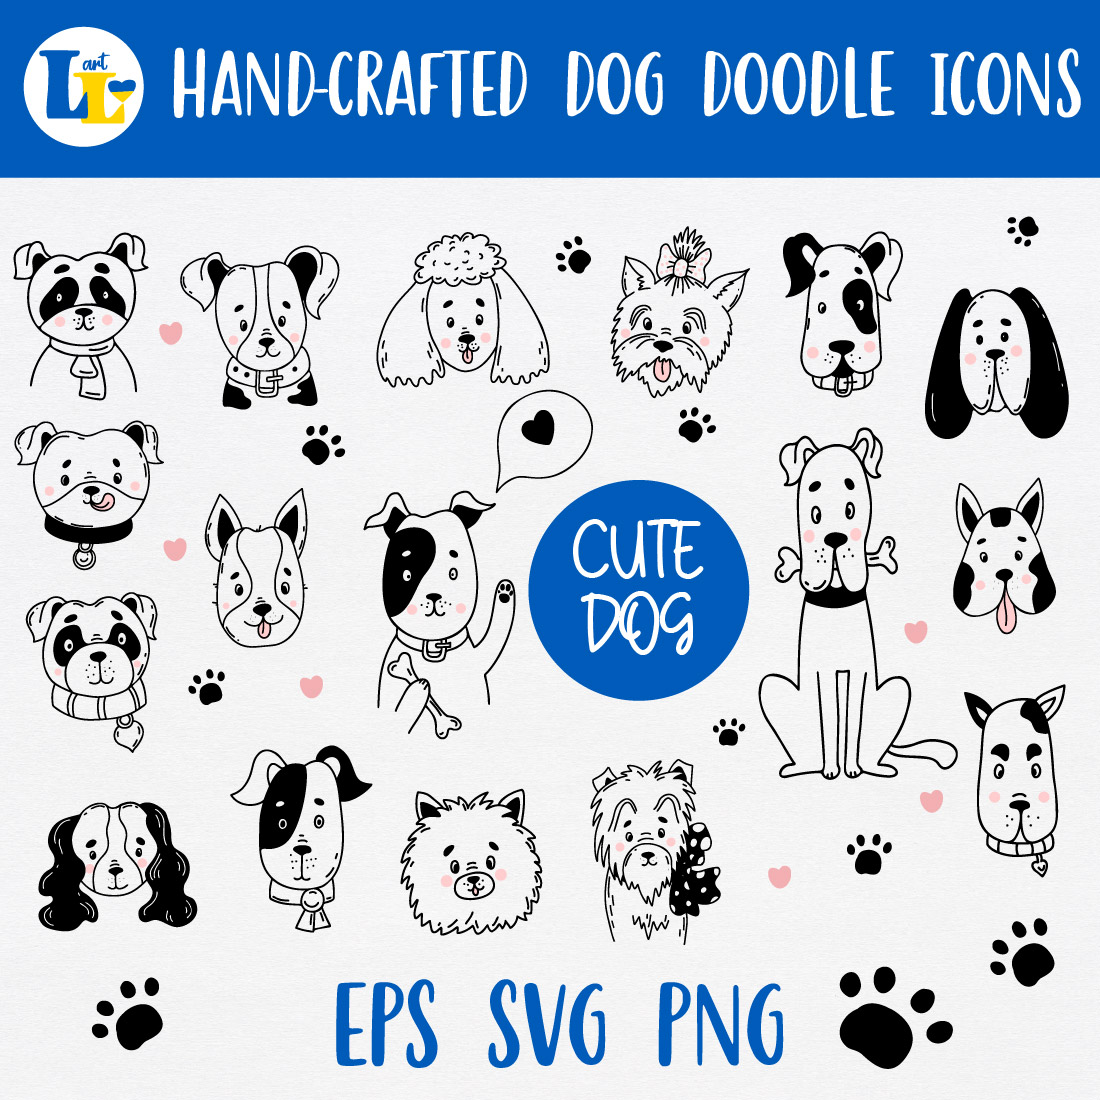 19 Cute Dog Doodles EPS PNG cover image.